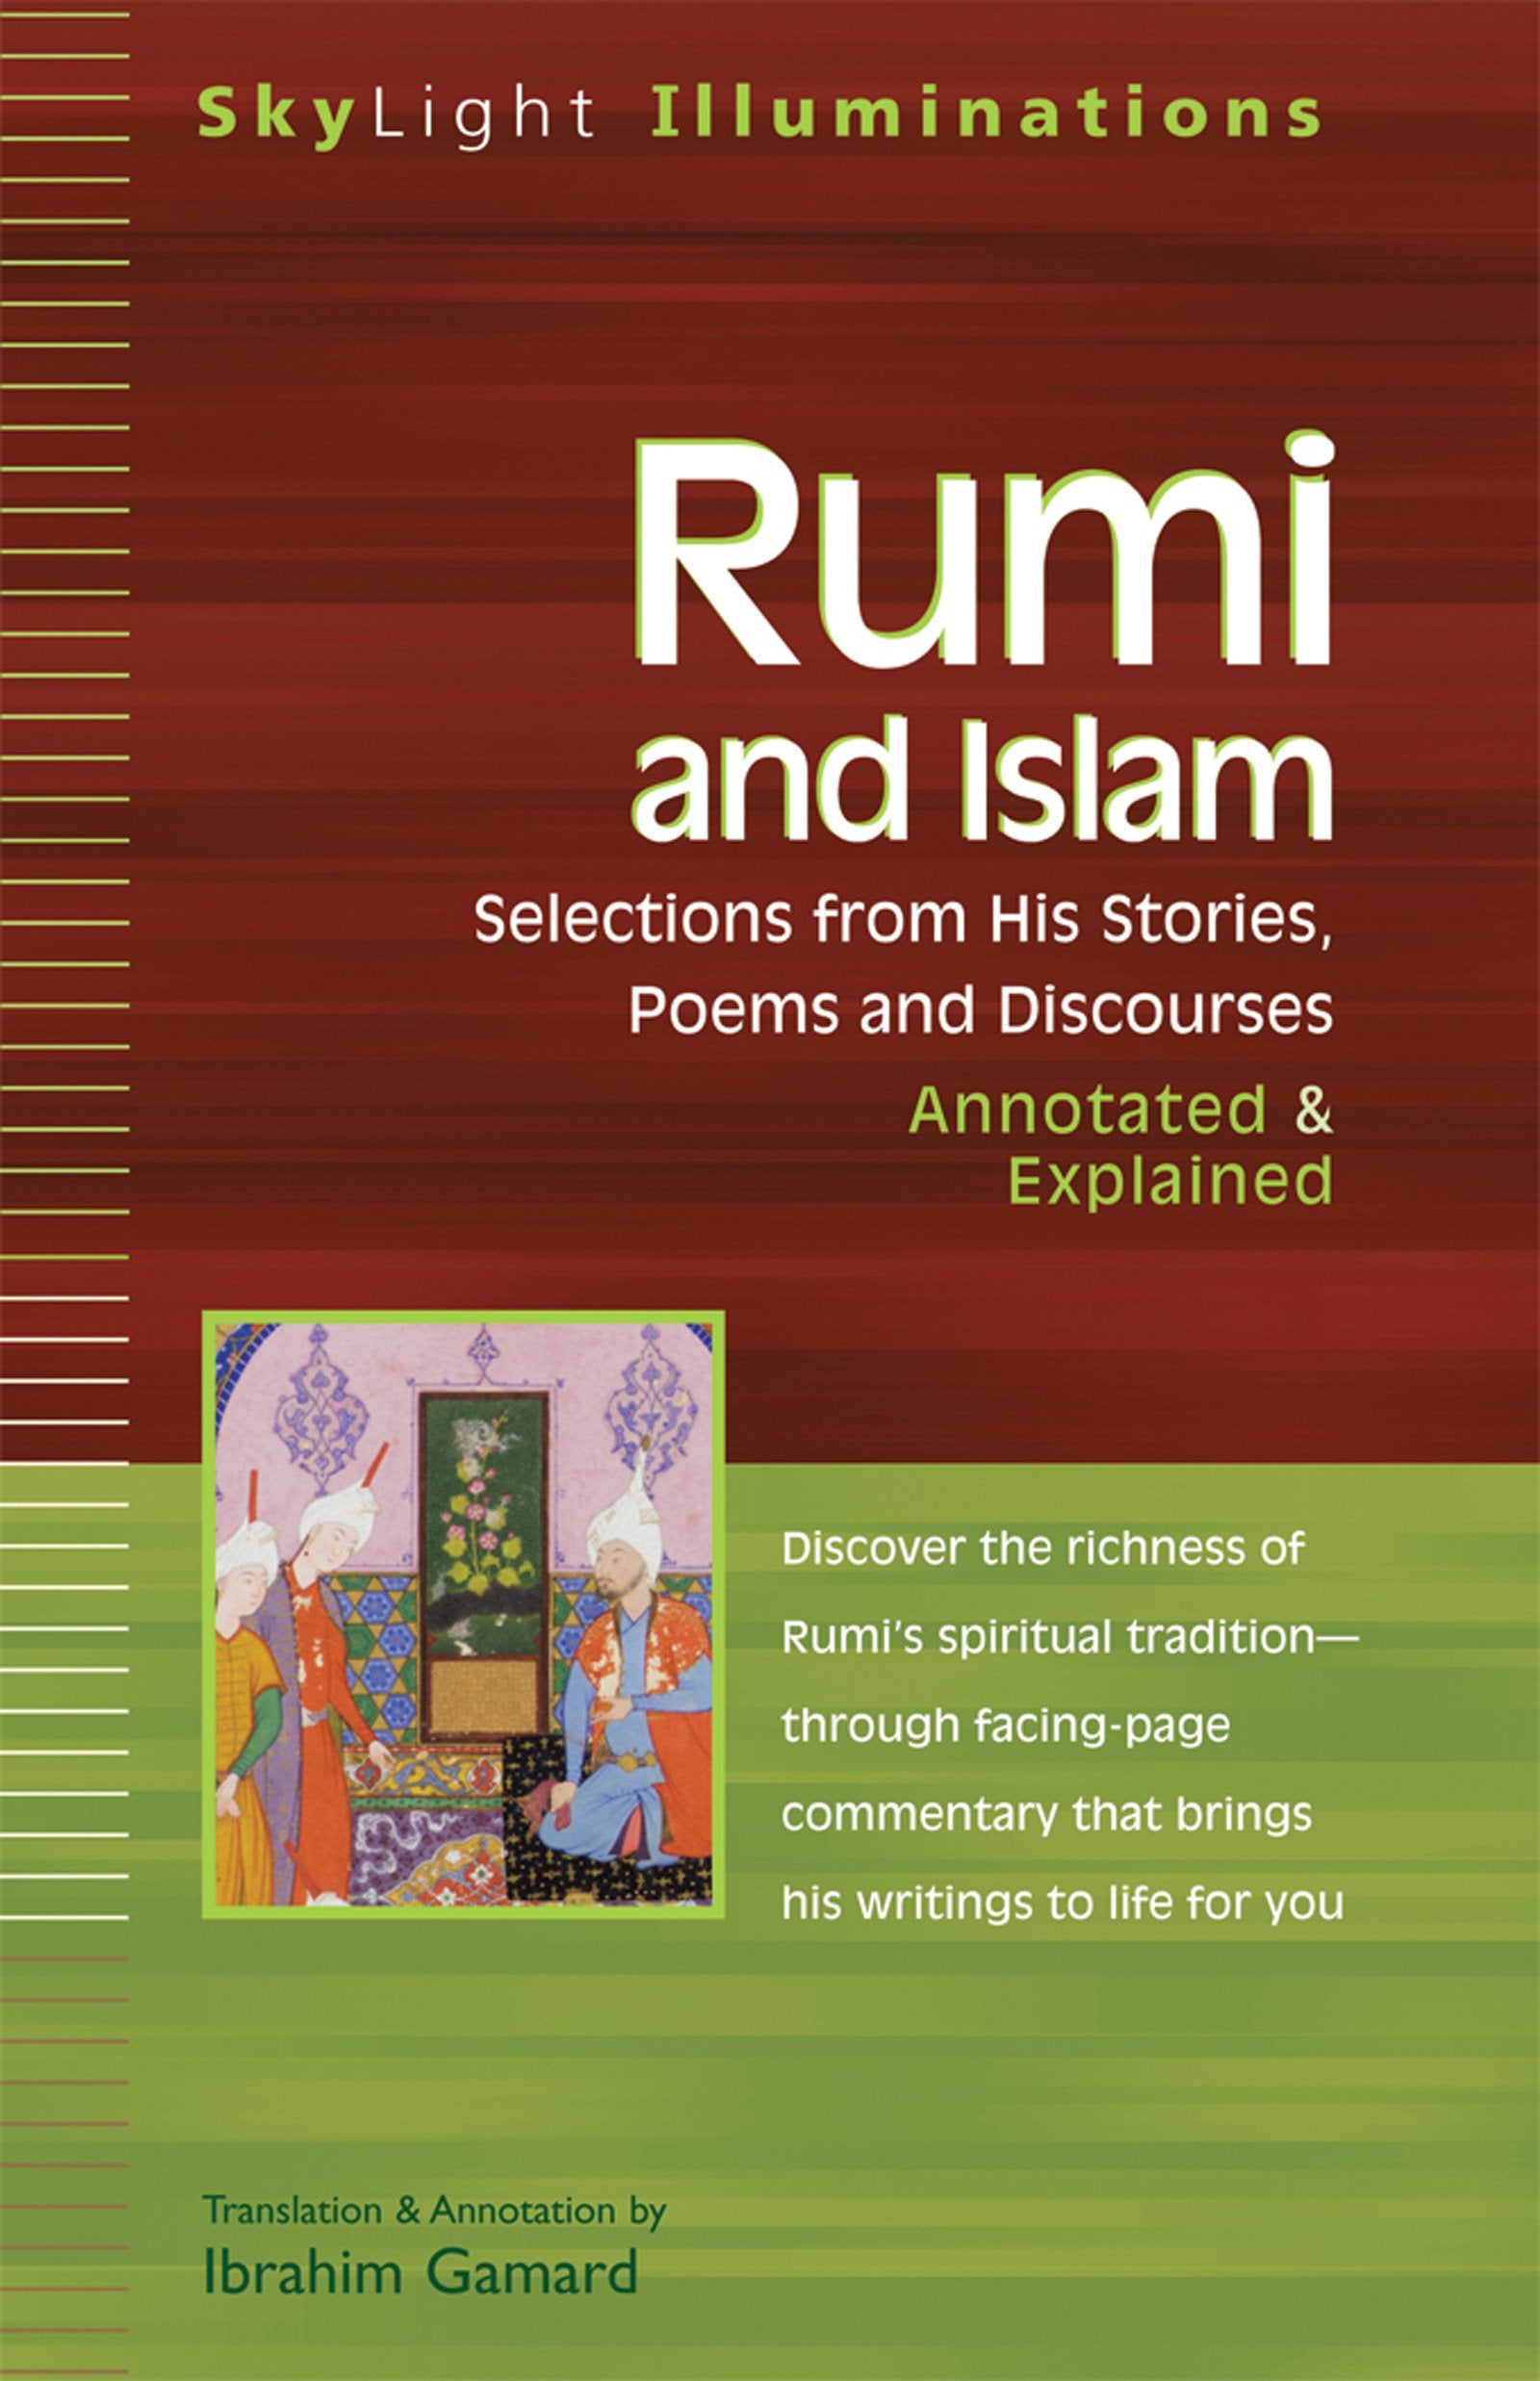 Rumi and Islam: Selections from His Stories, Poems and Discourses